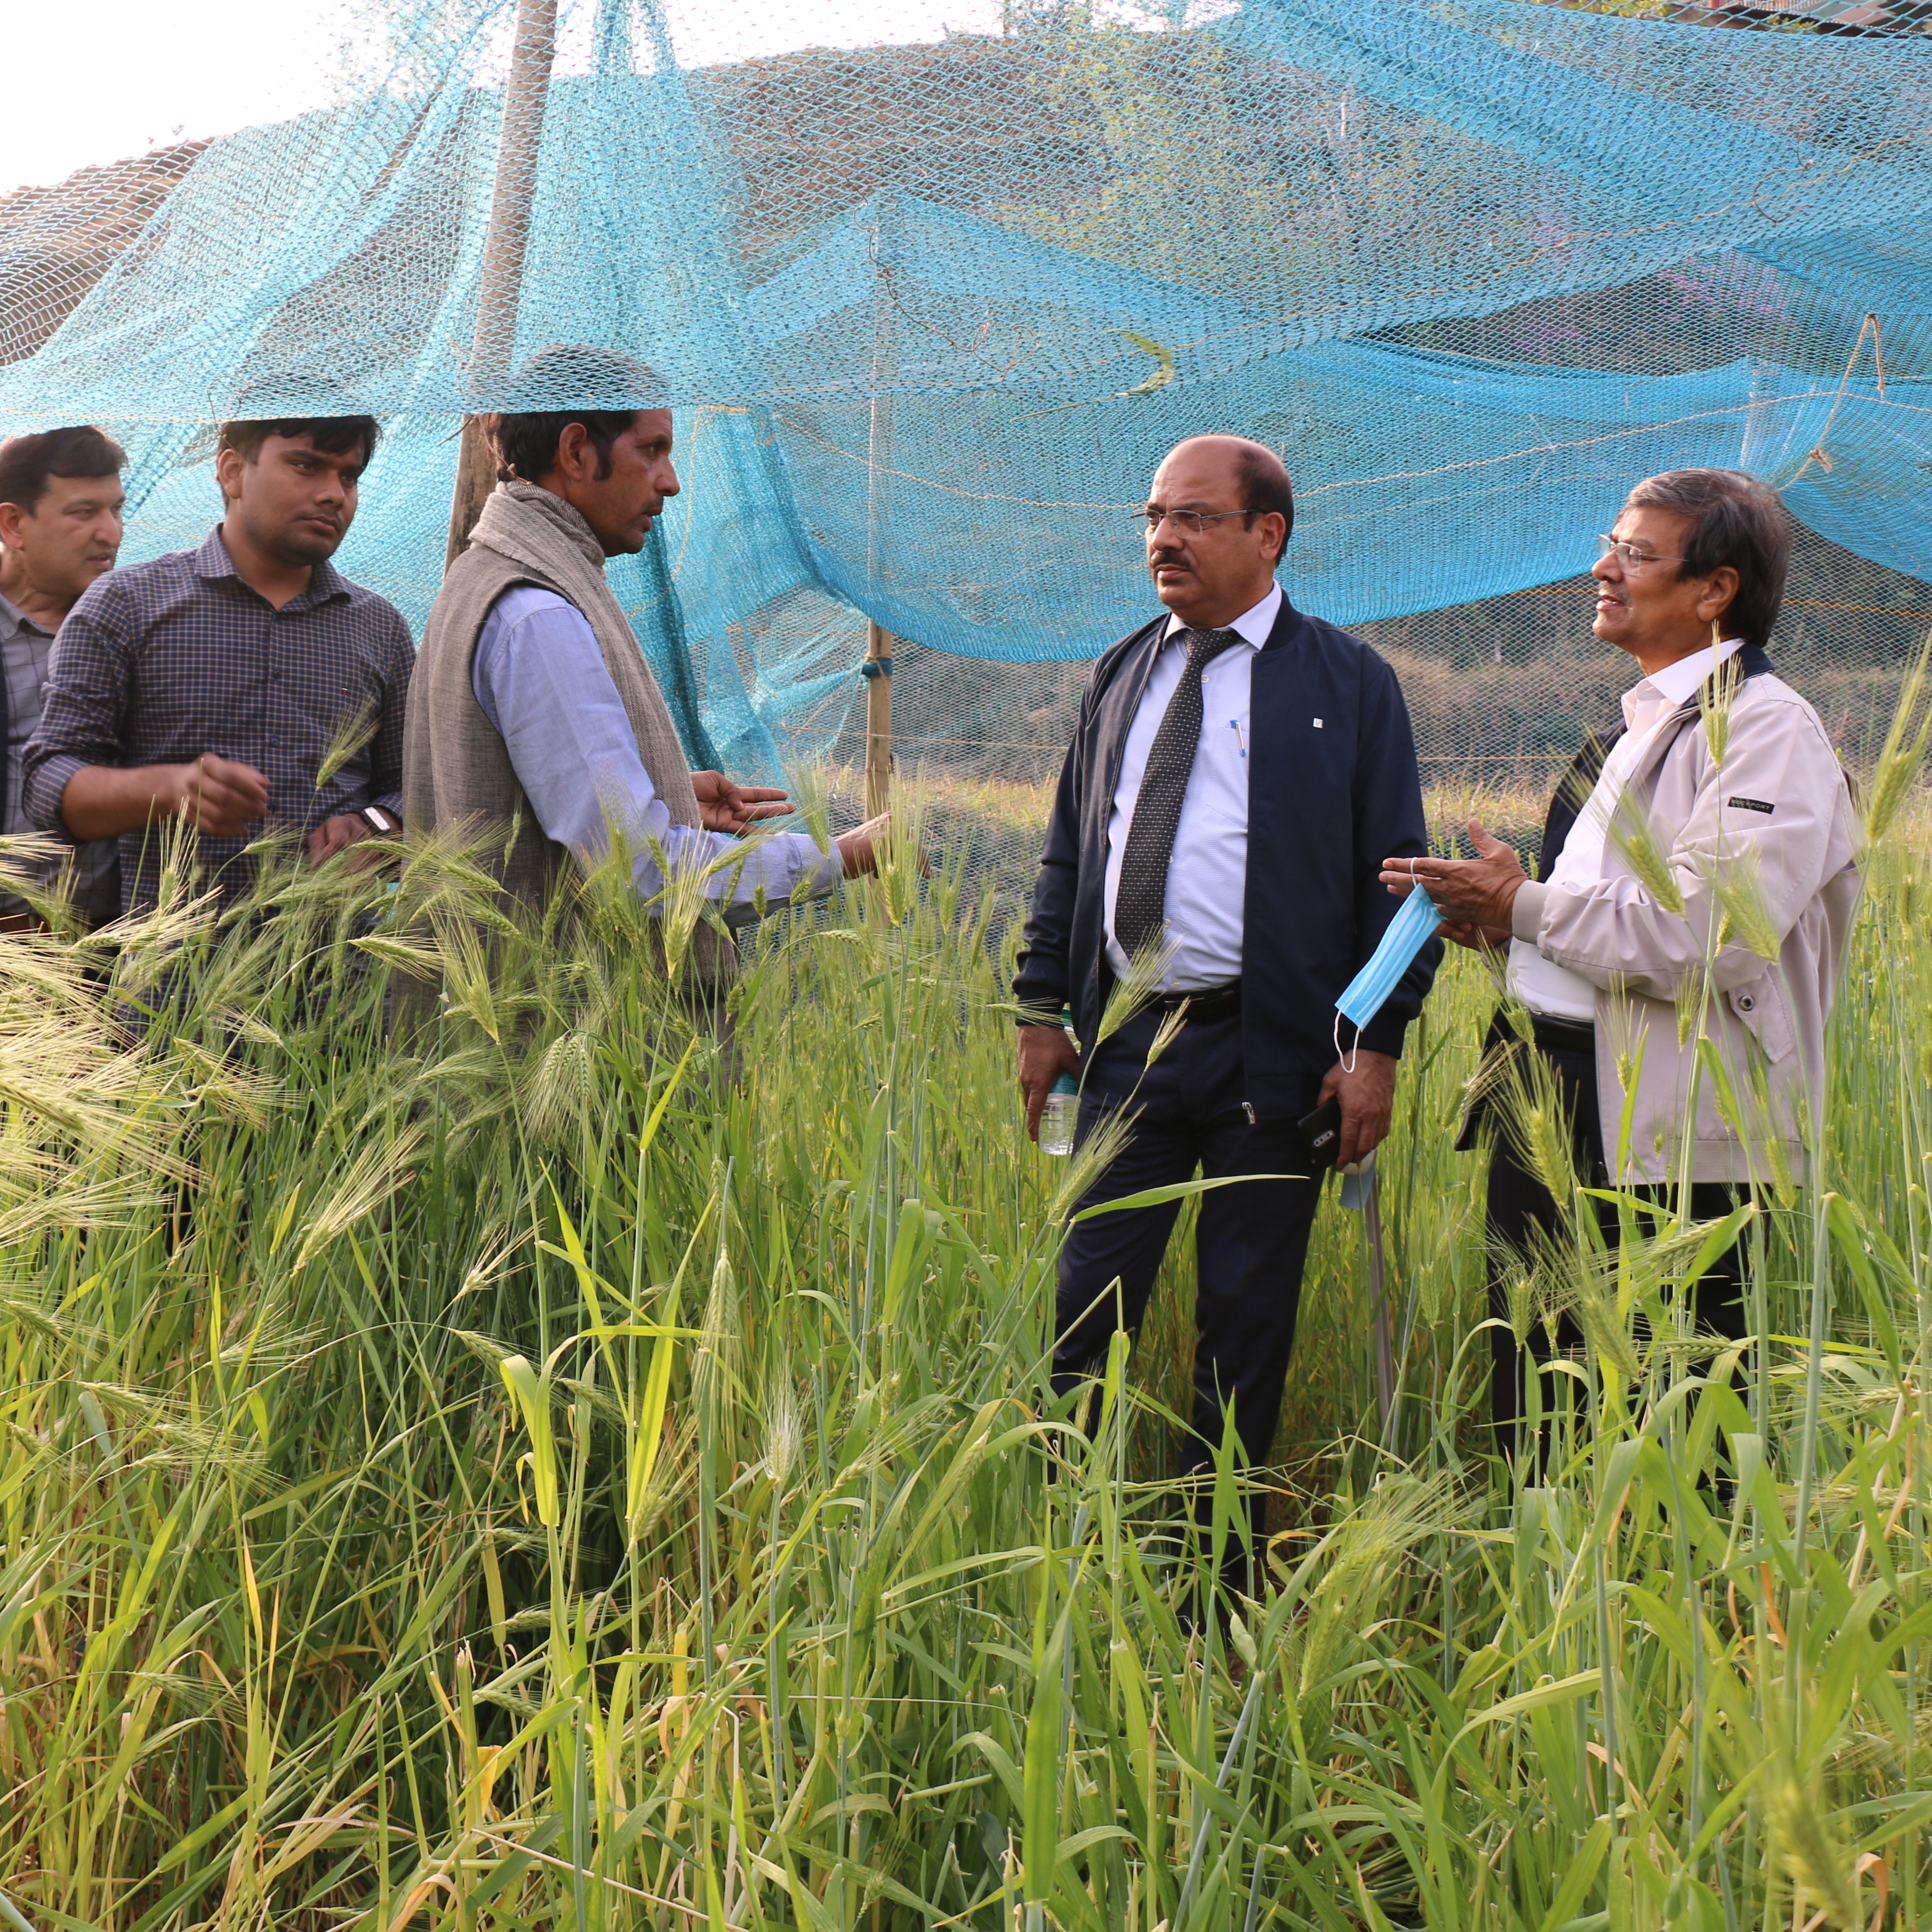 MTR consultant interacting with farmers at Almora. Credit: Sonal Dsouza